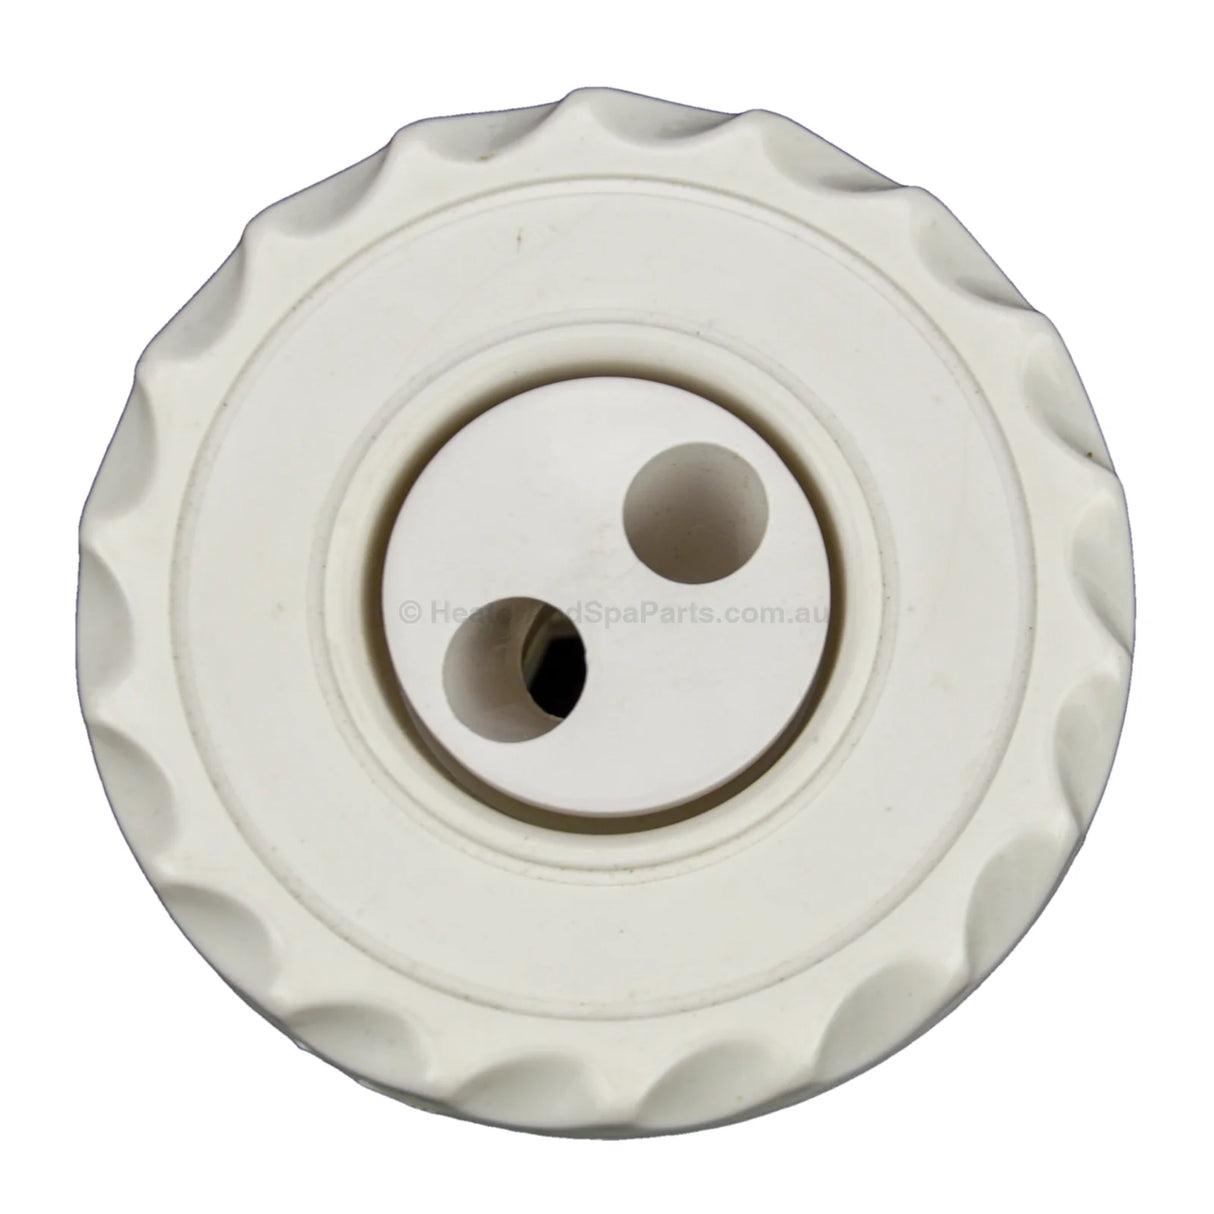 66mm Waterway Adjustable Mini Jet - Twin Pulse Roto - White - Heater and Spa Parts